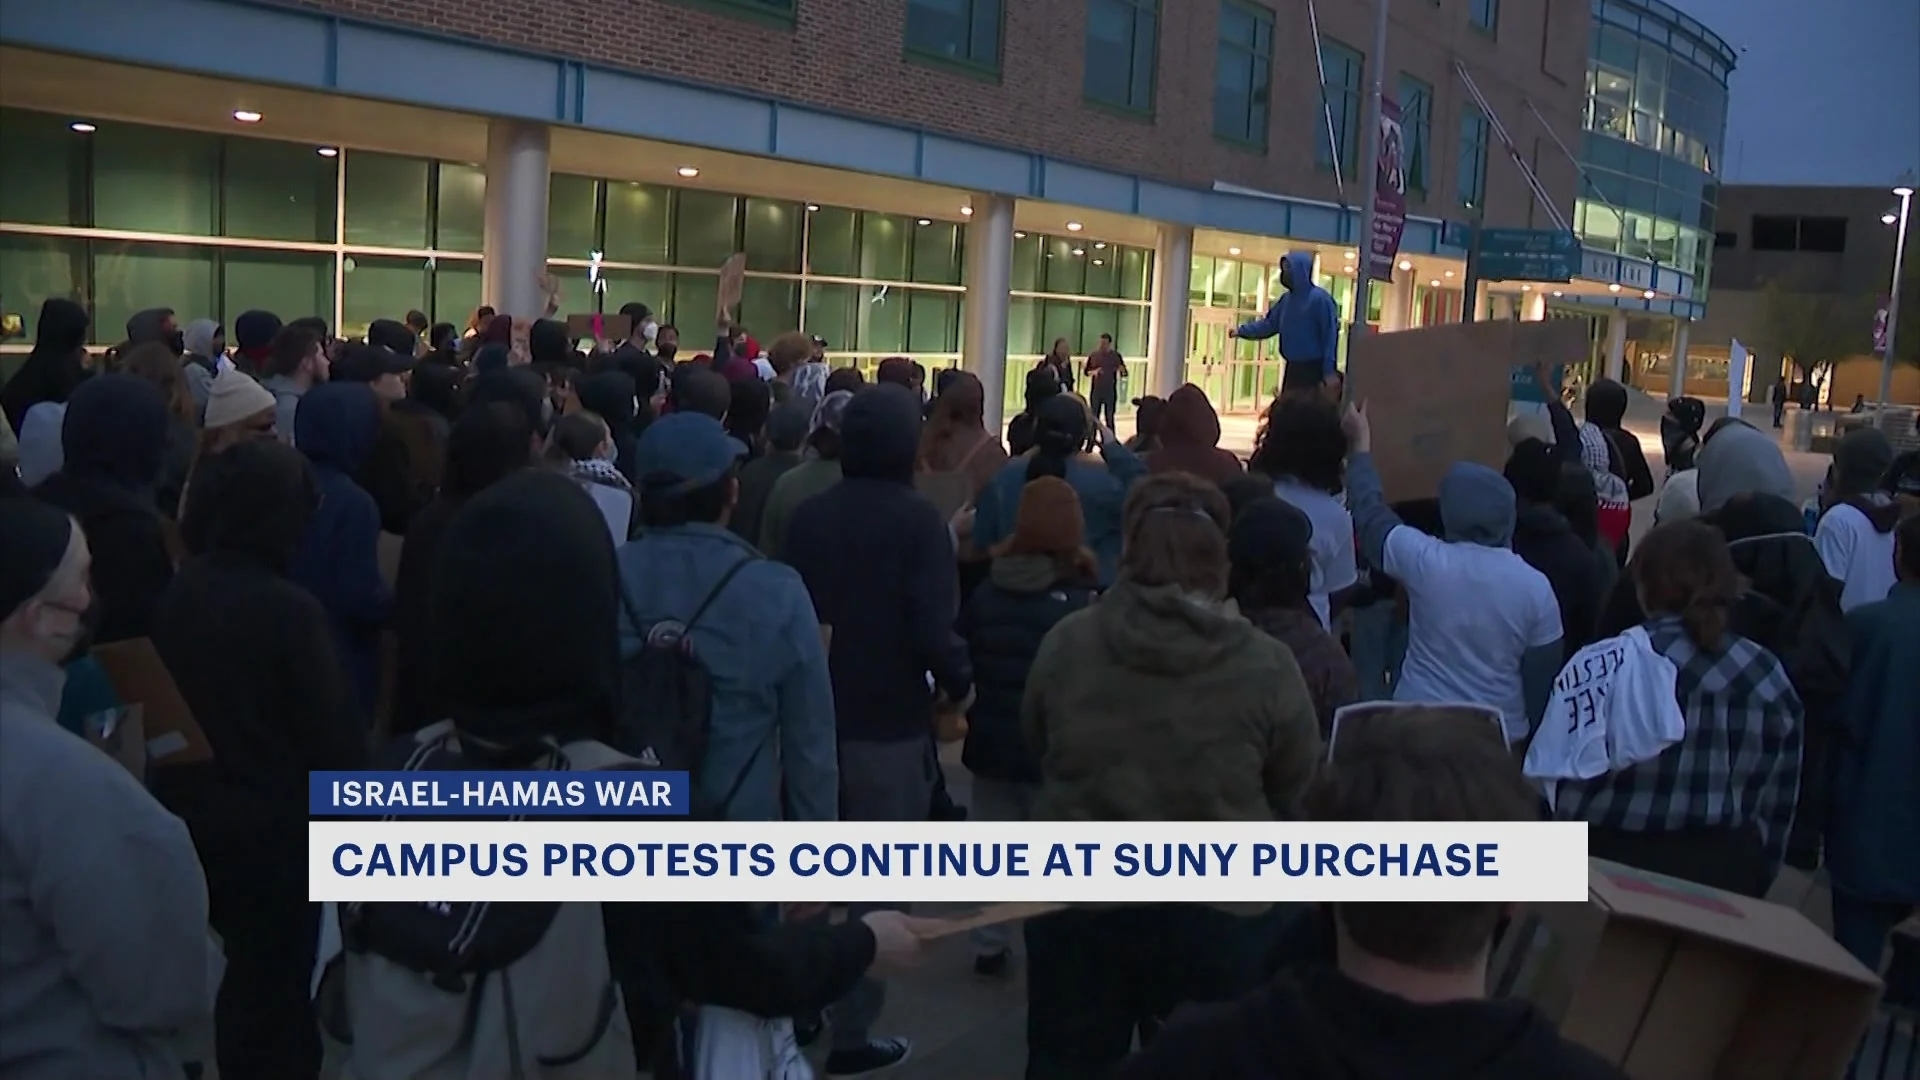 SUNY Purchase administrators monitor campus following encampment arrests